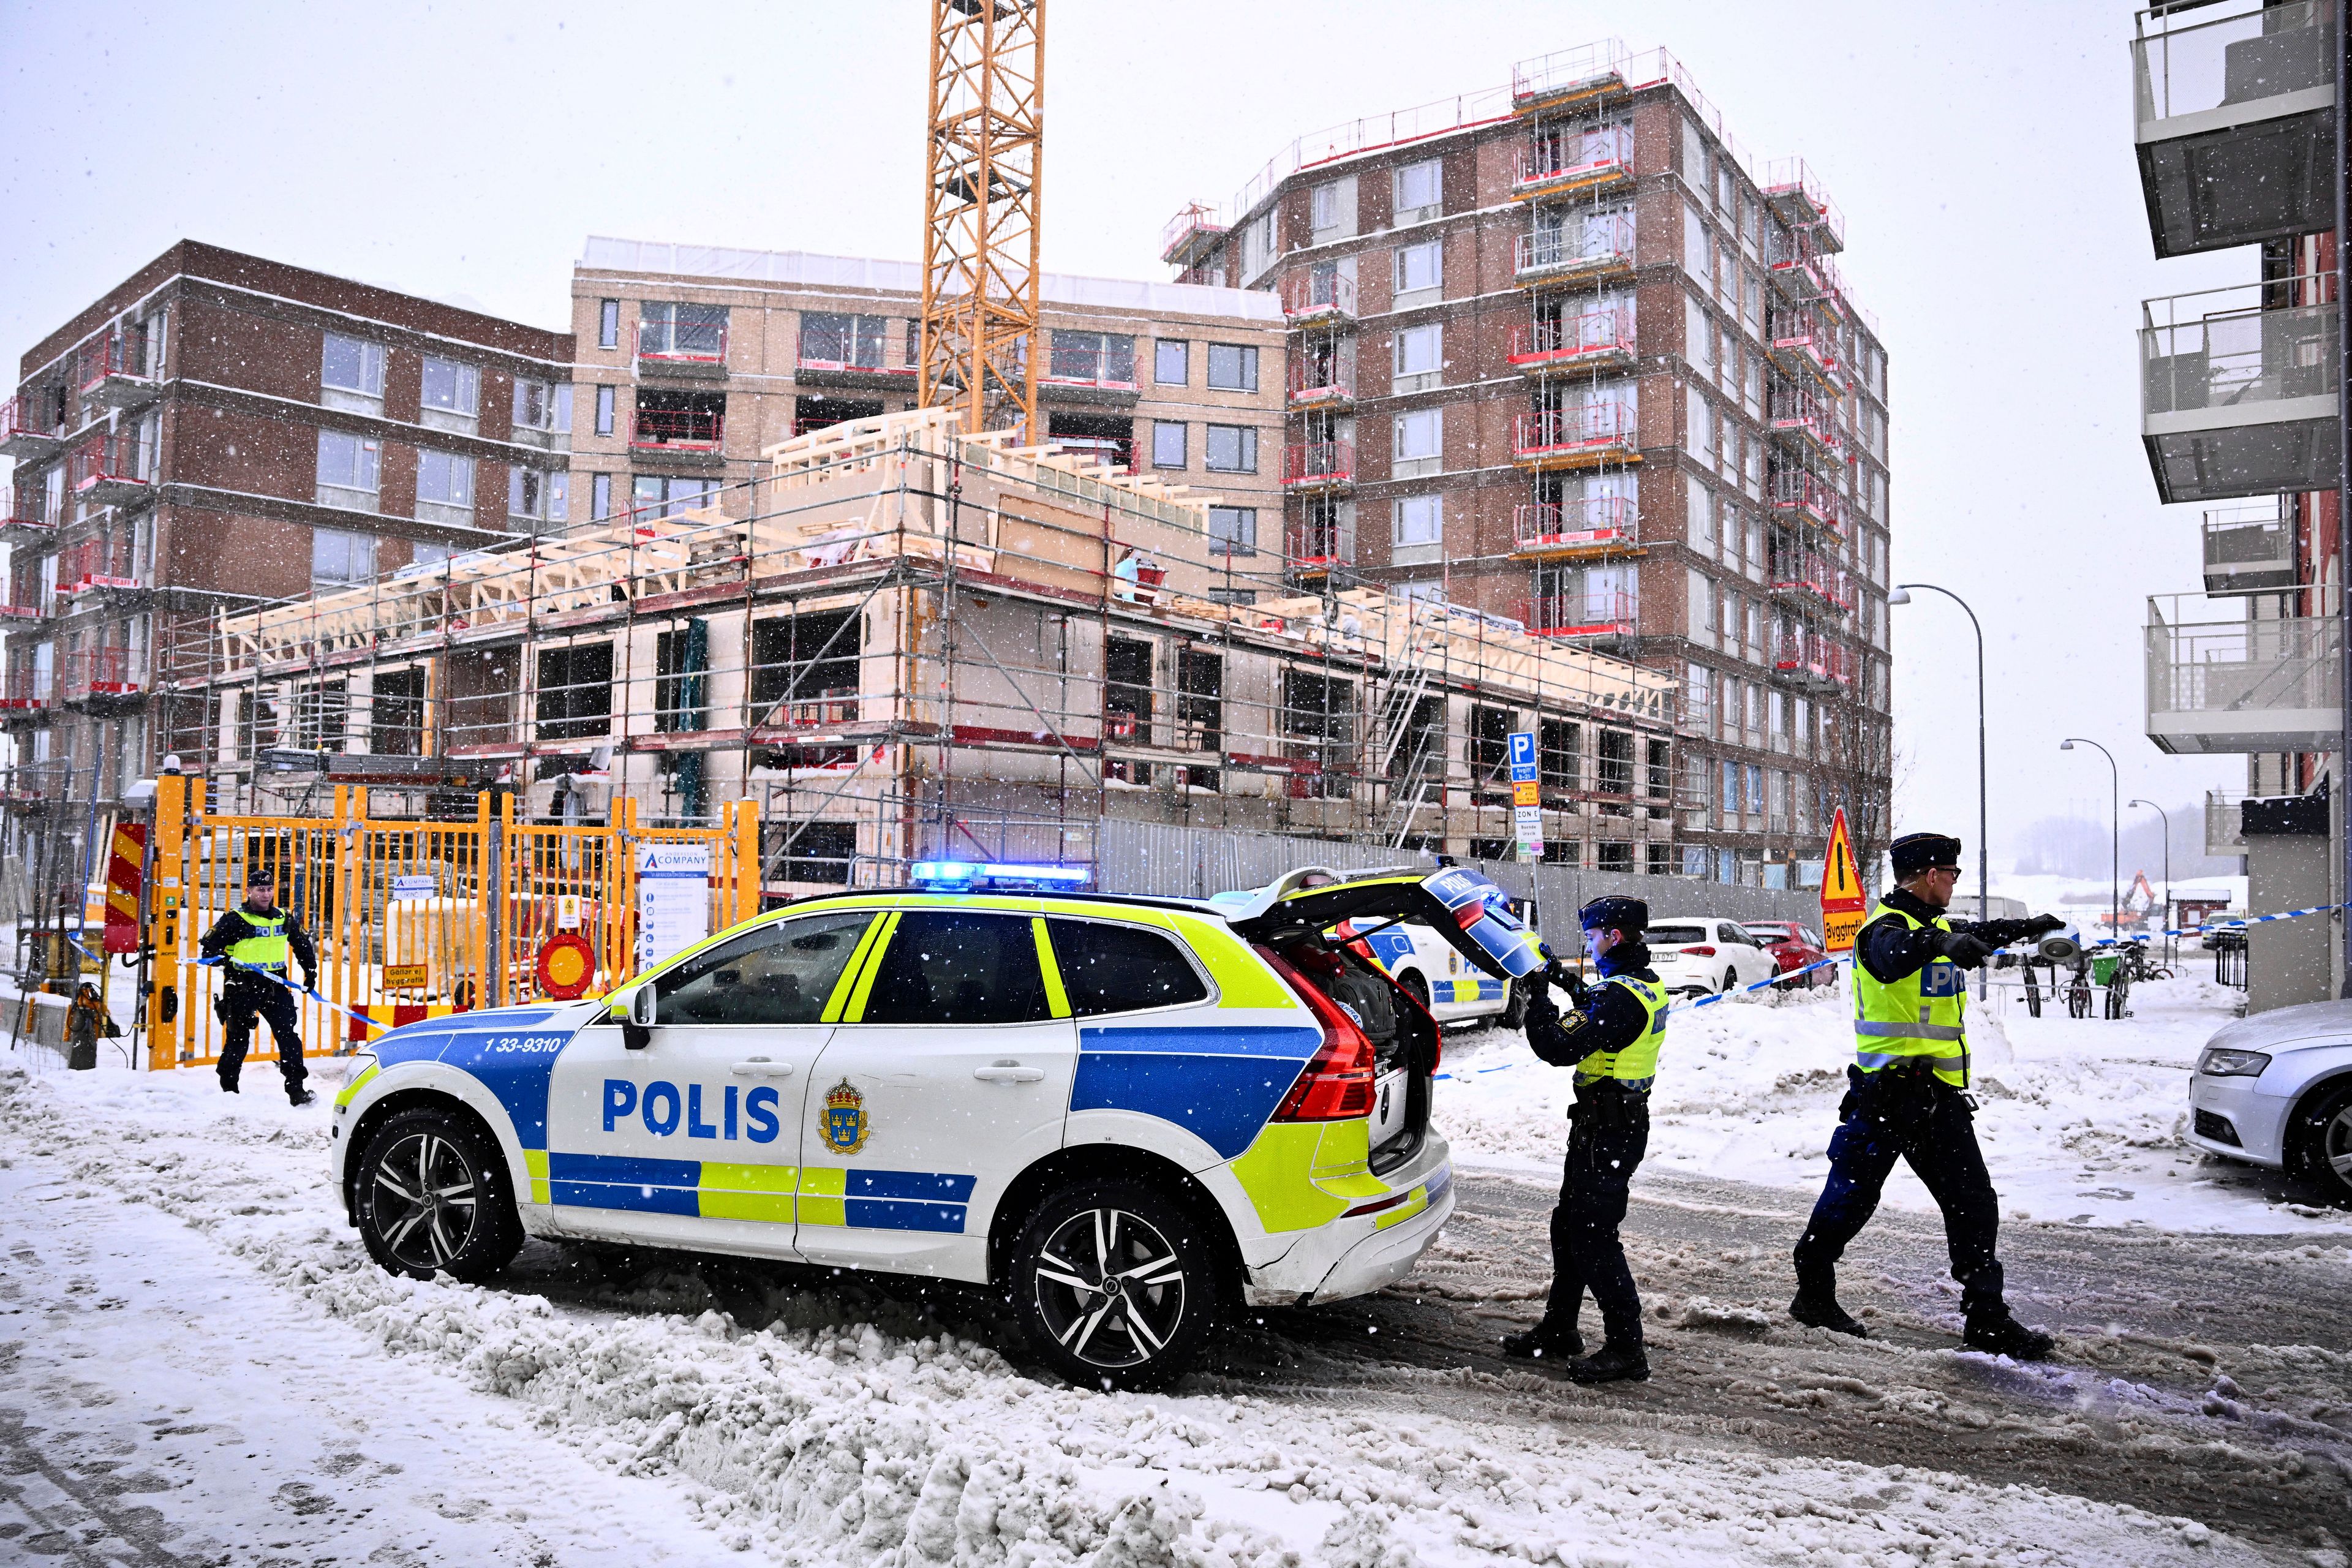 Missing nuts and bolts caused last year's deadly construction elevator accident in Sweden